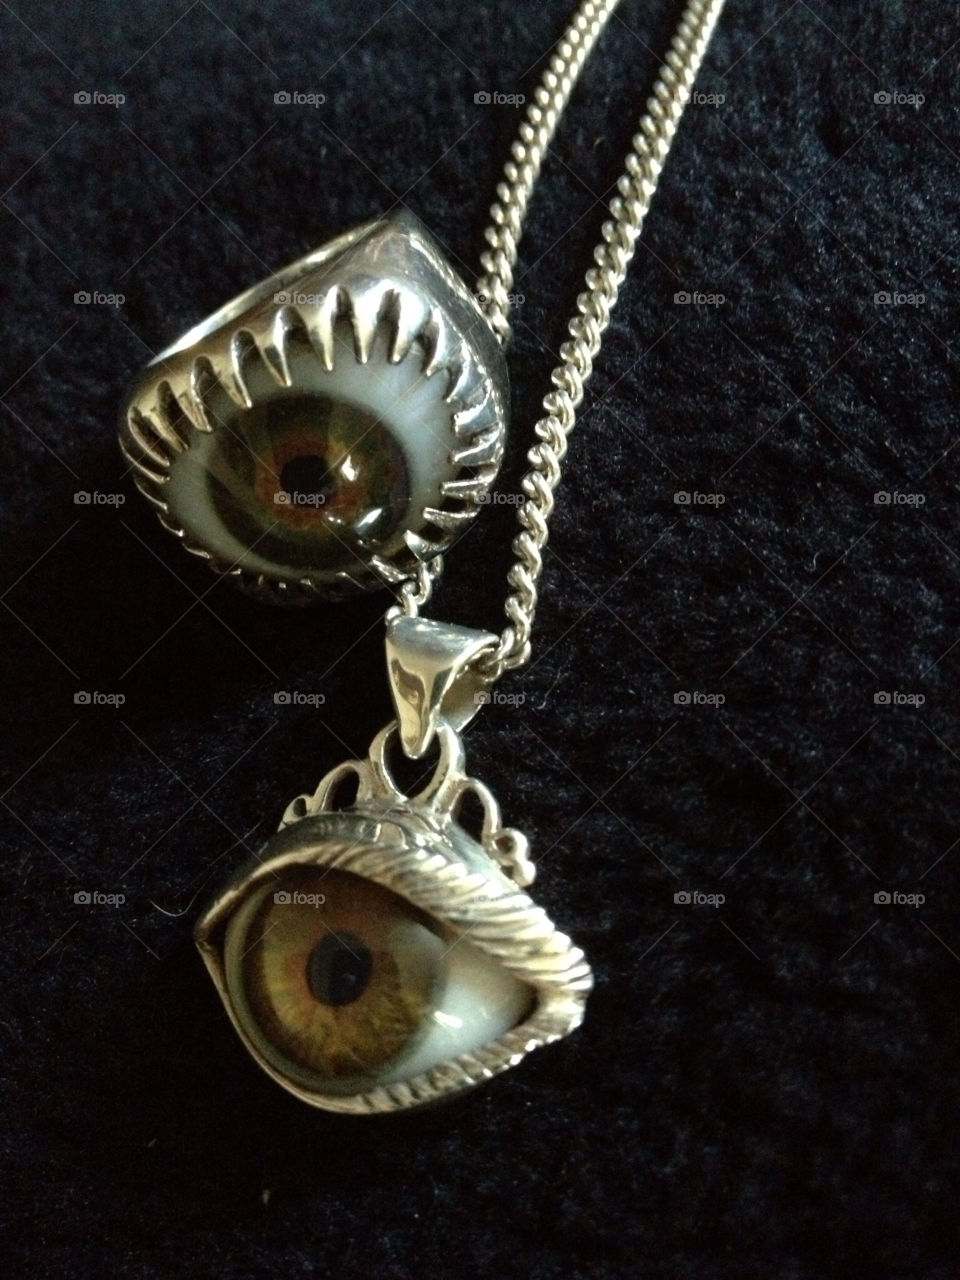 Great frog punk eye ring. The Great Frog jewlery was from the early punk days, glass eye ring